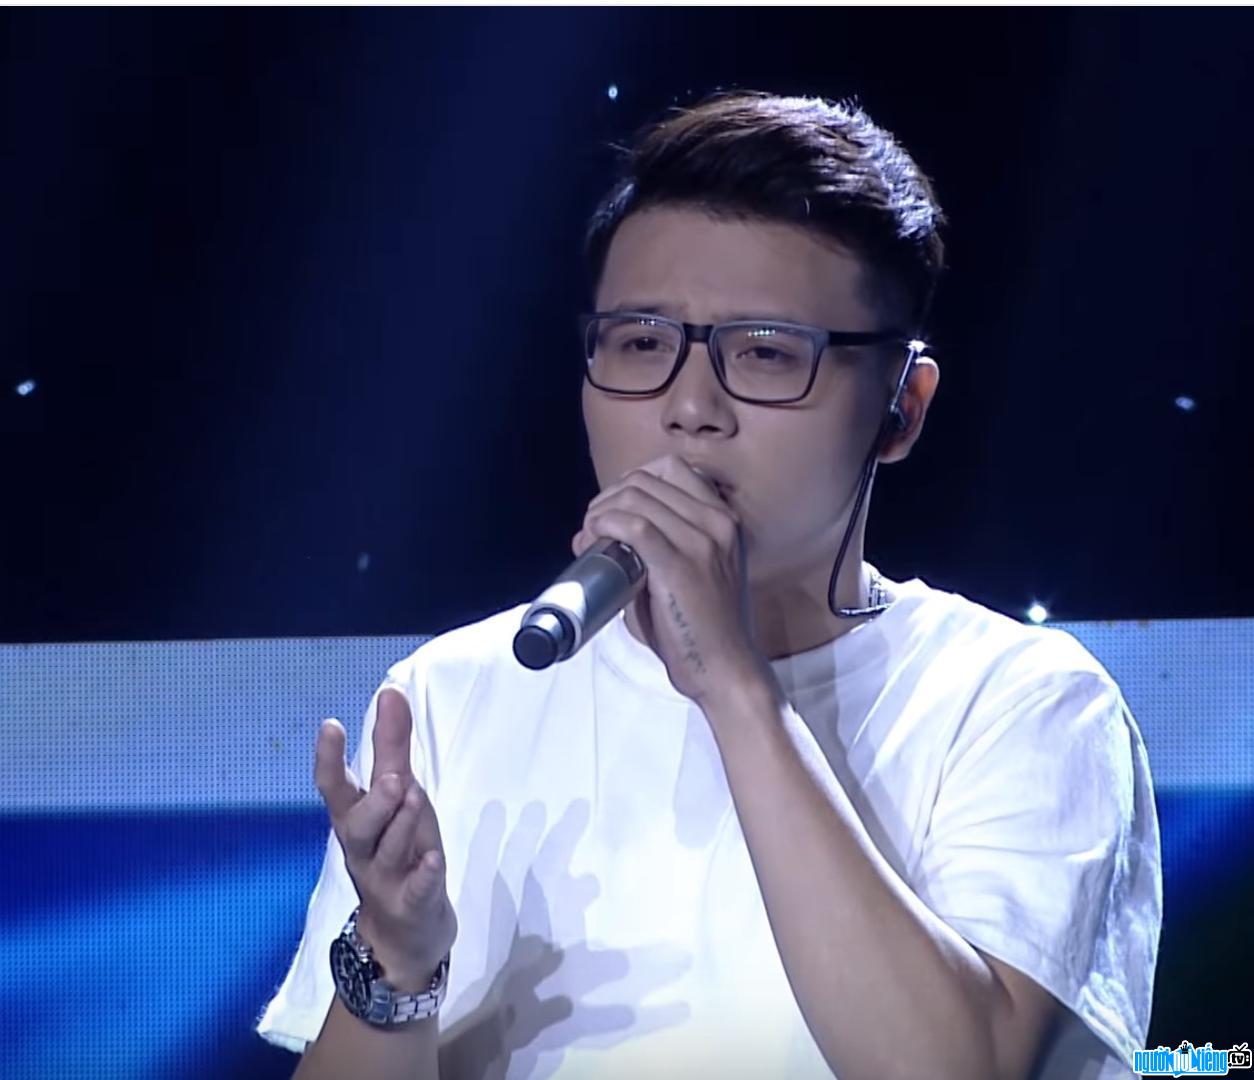  Picture of singer Duong Thuan in The Voice 2017 show